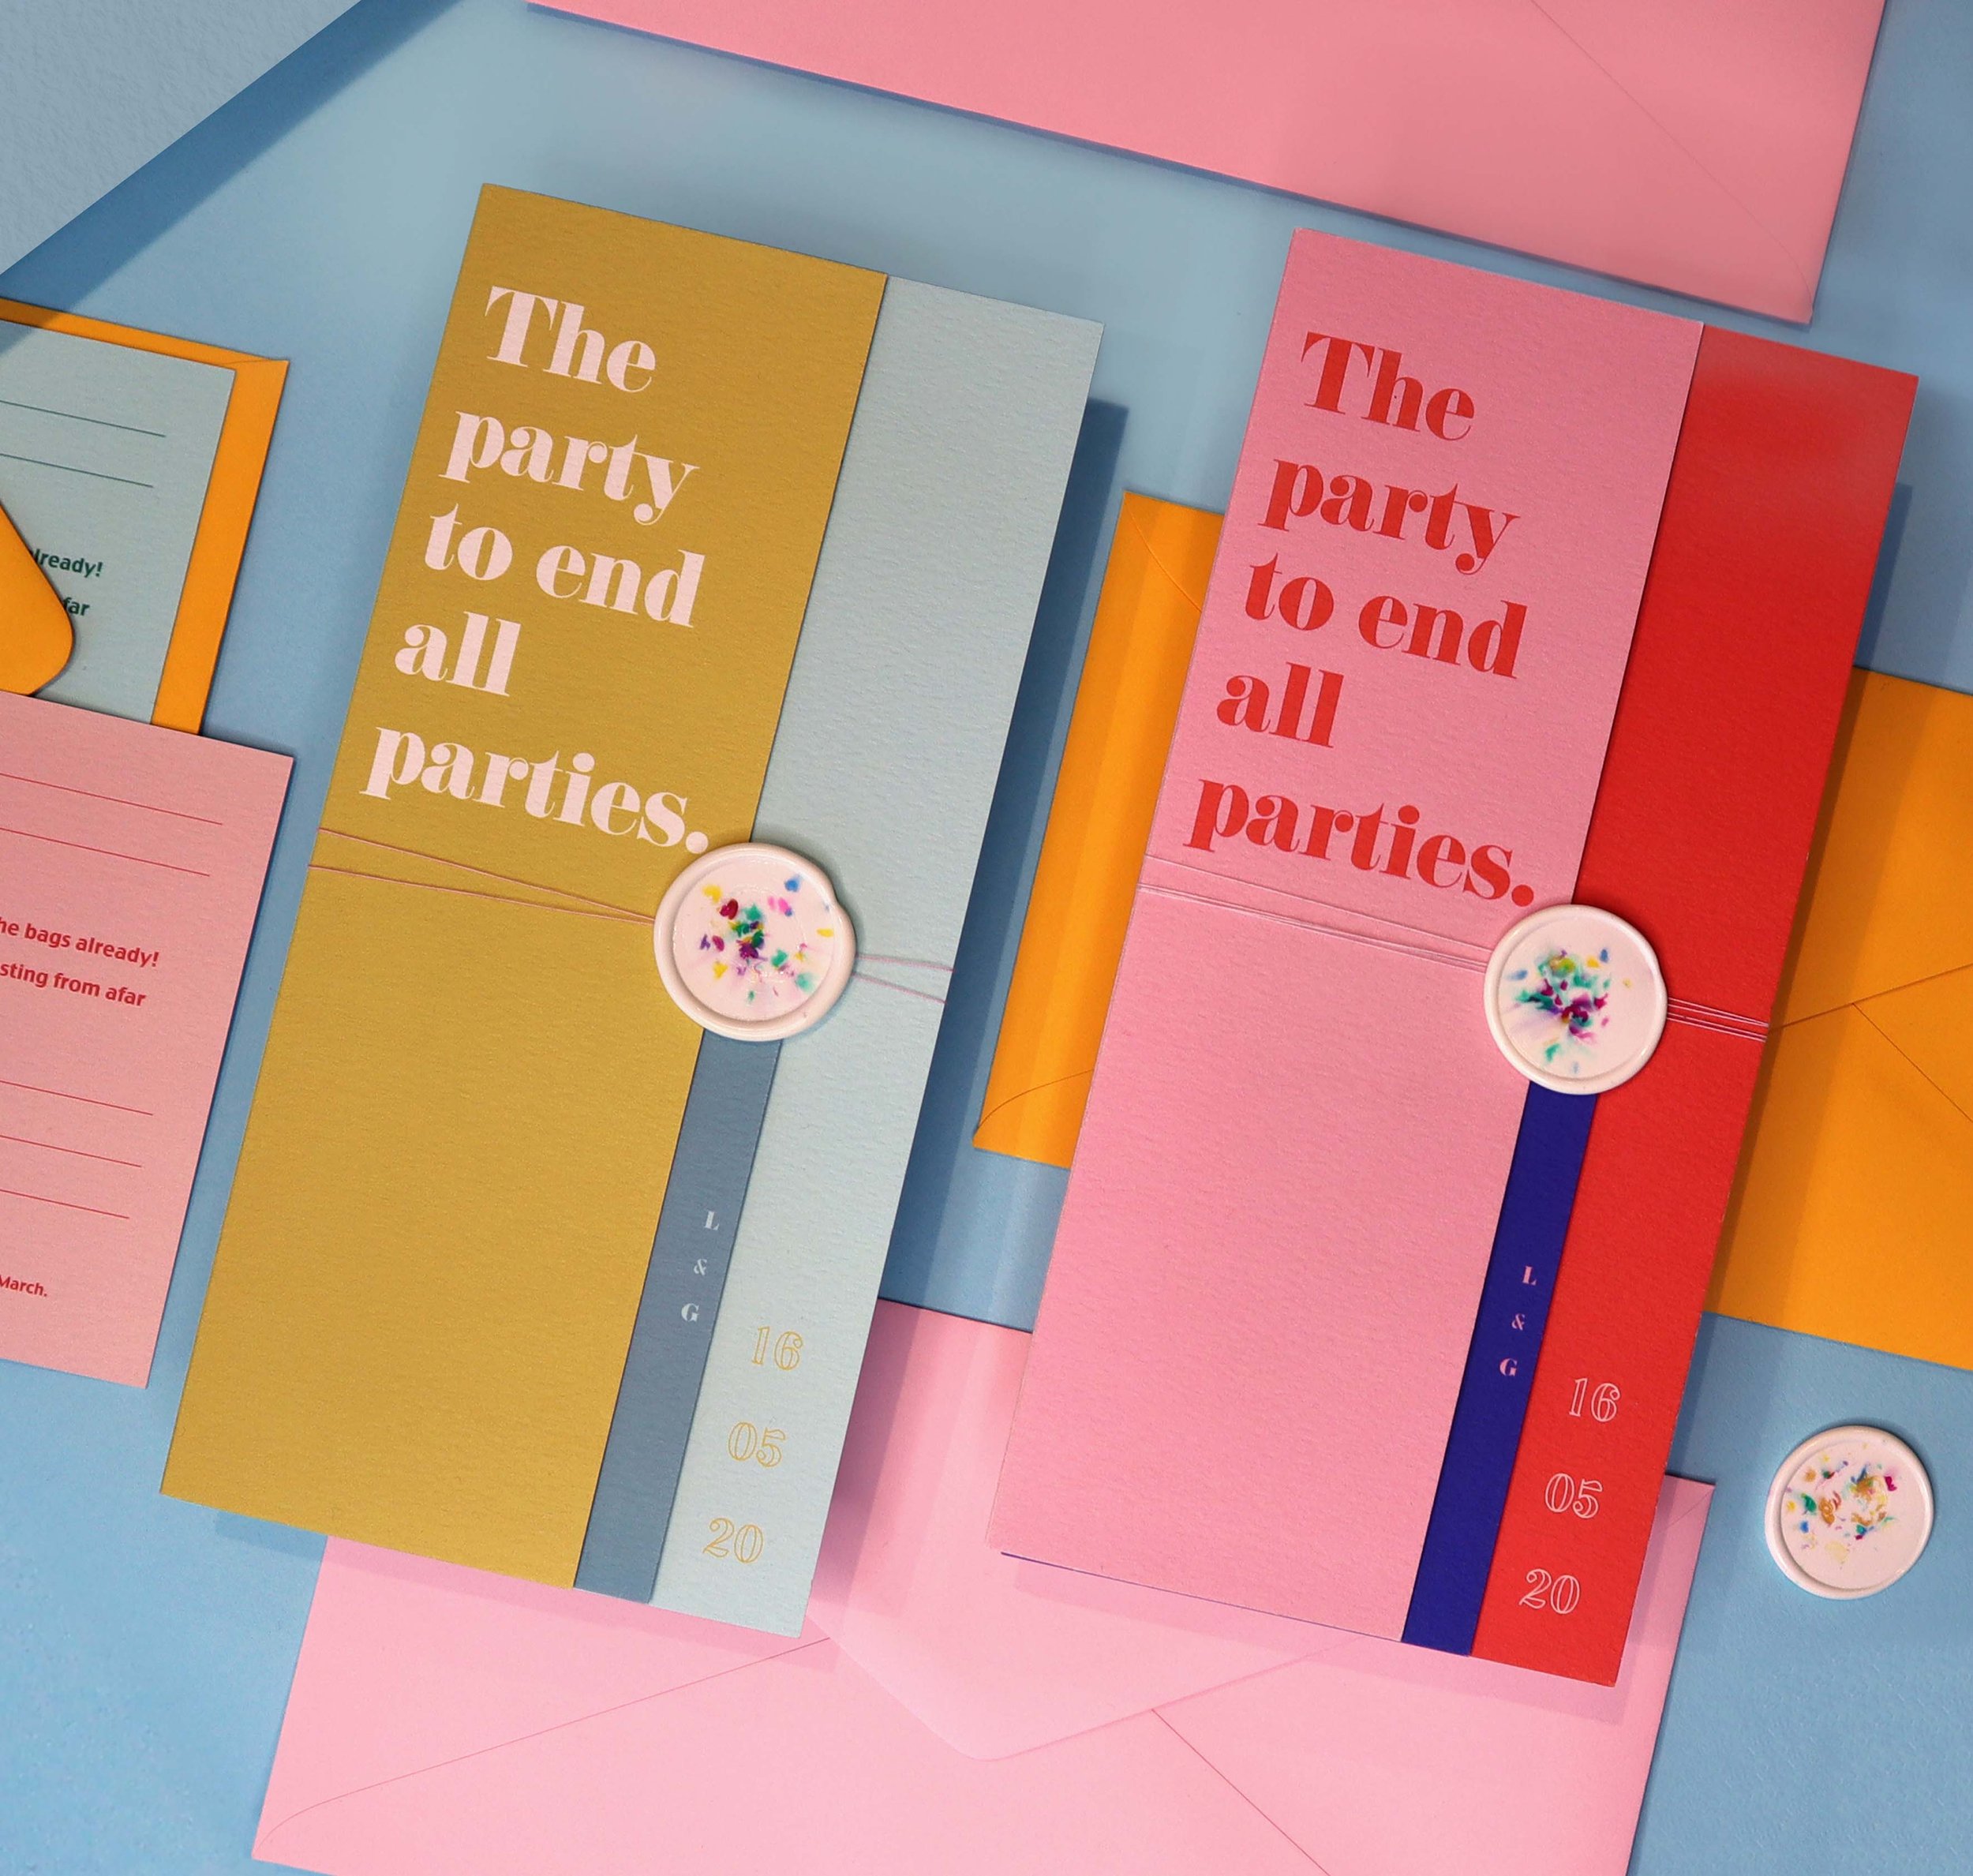  A wedding bespoke wedding stationery suite with a  unique colour palette of mustard, duck egg, red and pink. The invites are rectangular and have cool type that says ‘The party to end all parties’. 